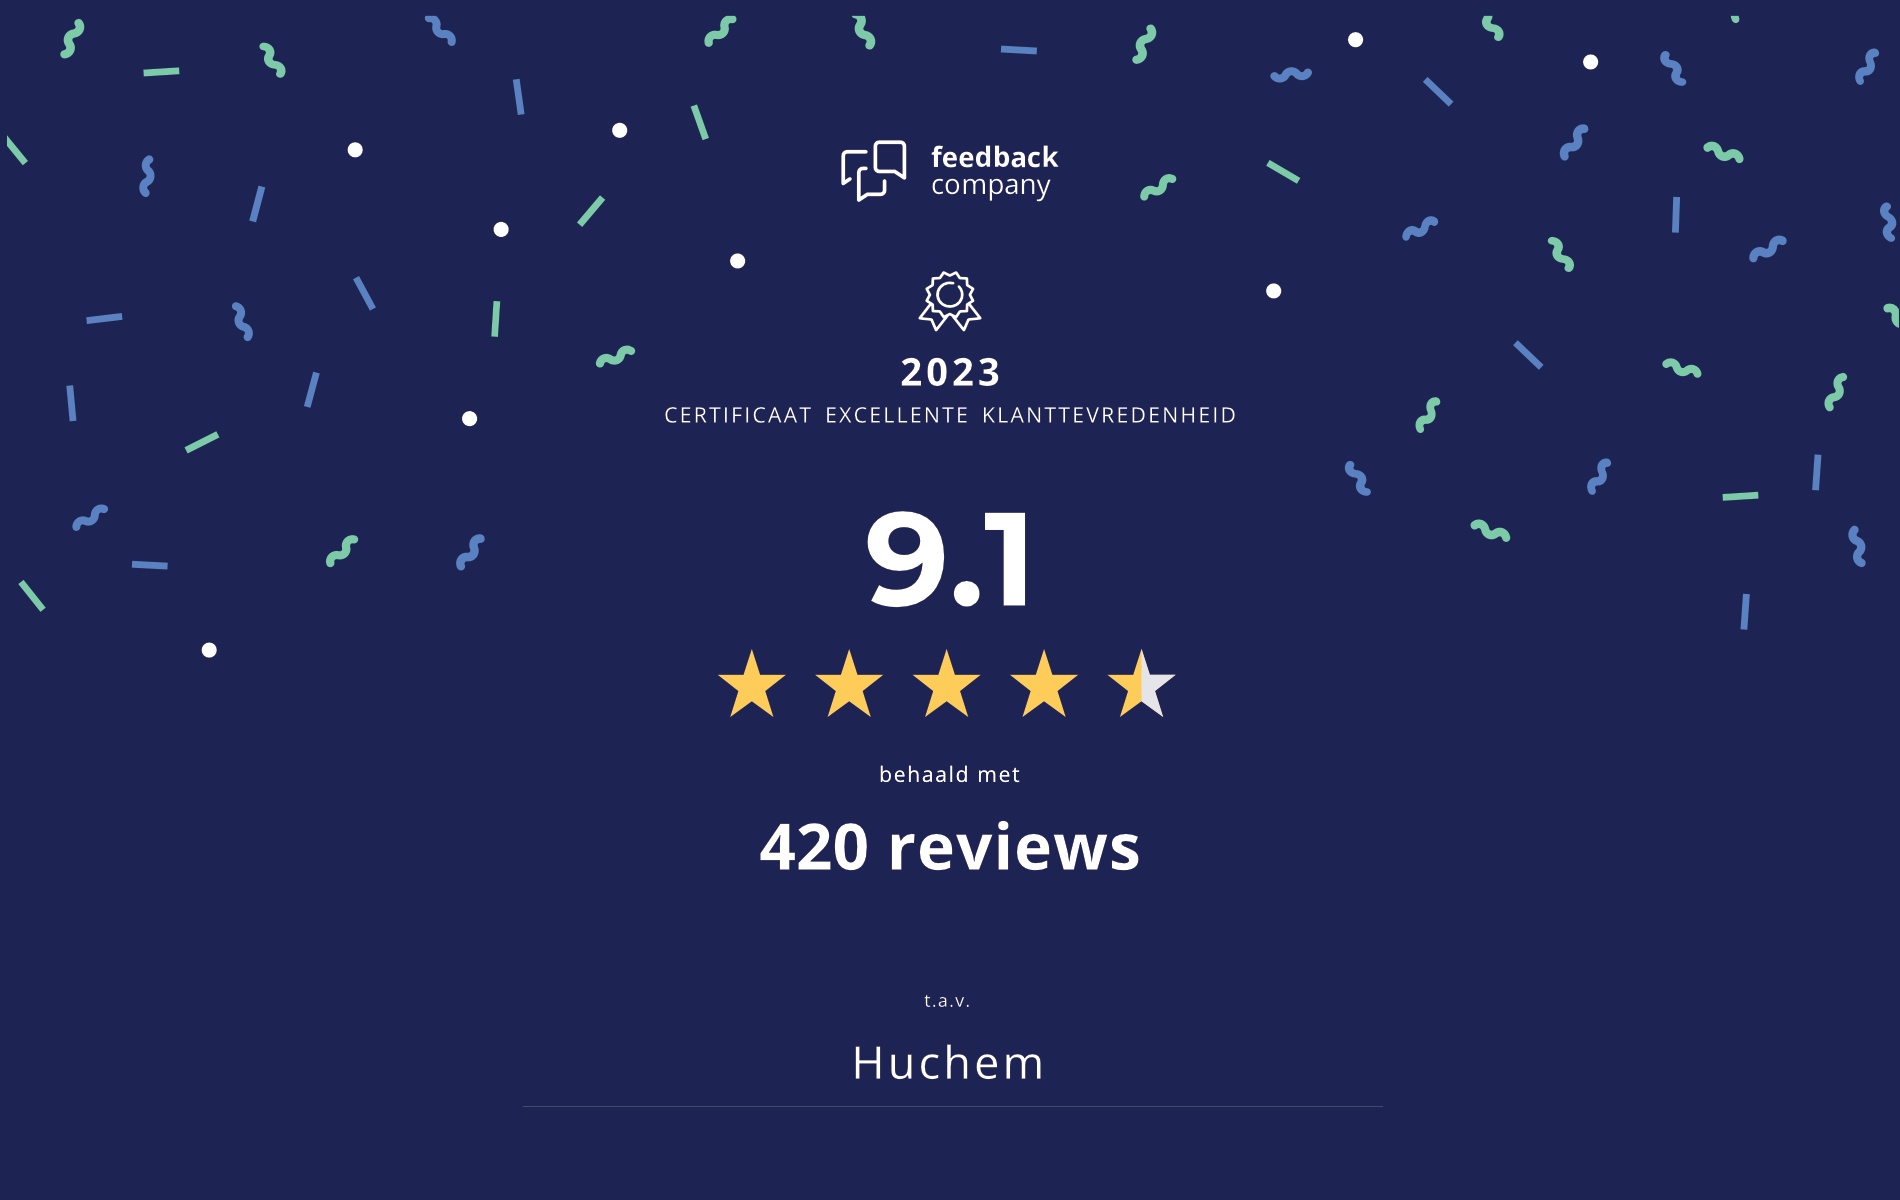 Check here our reviews